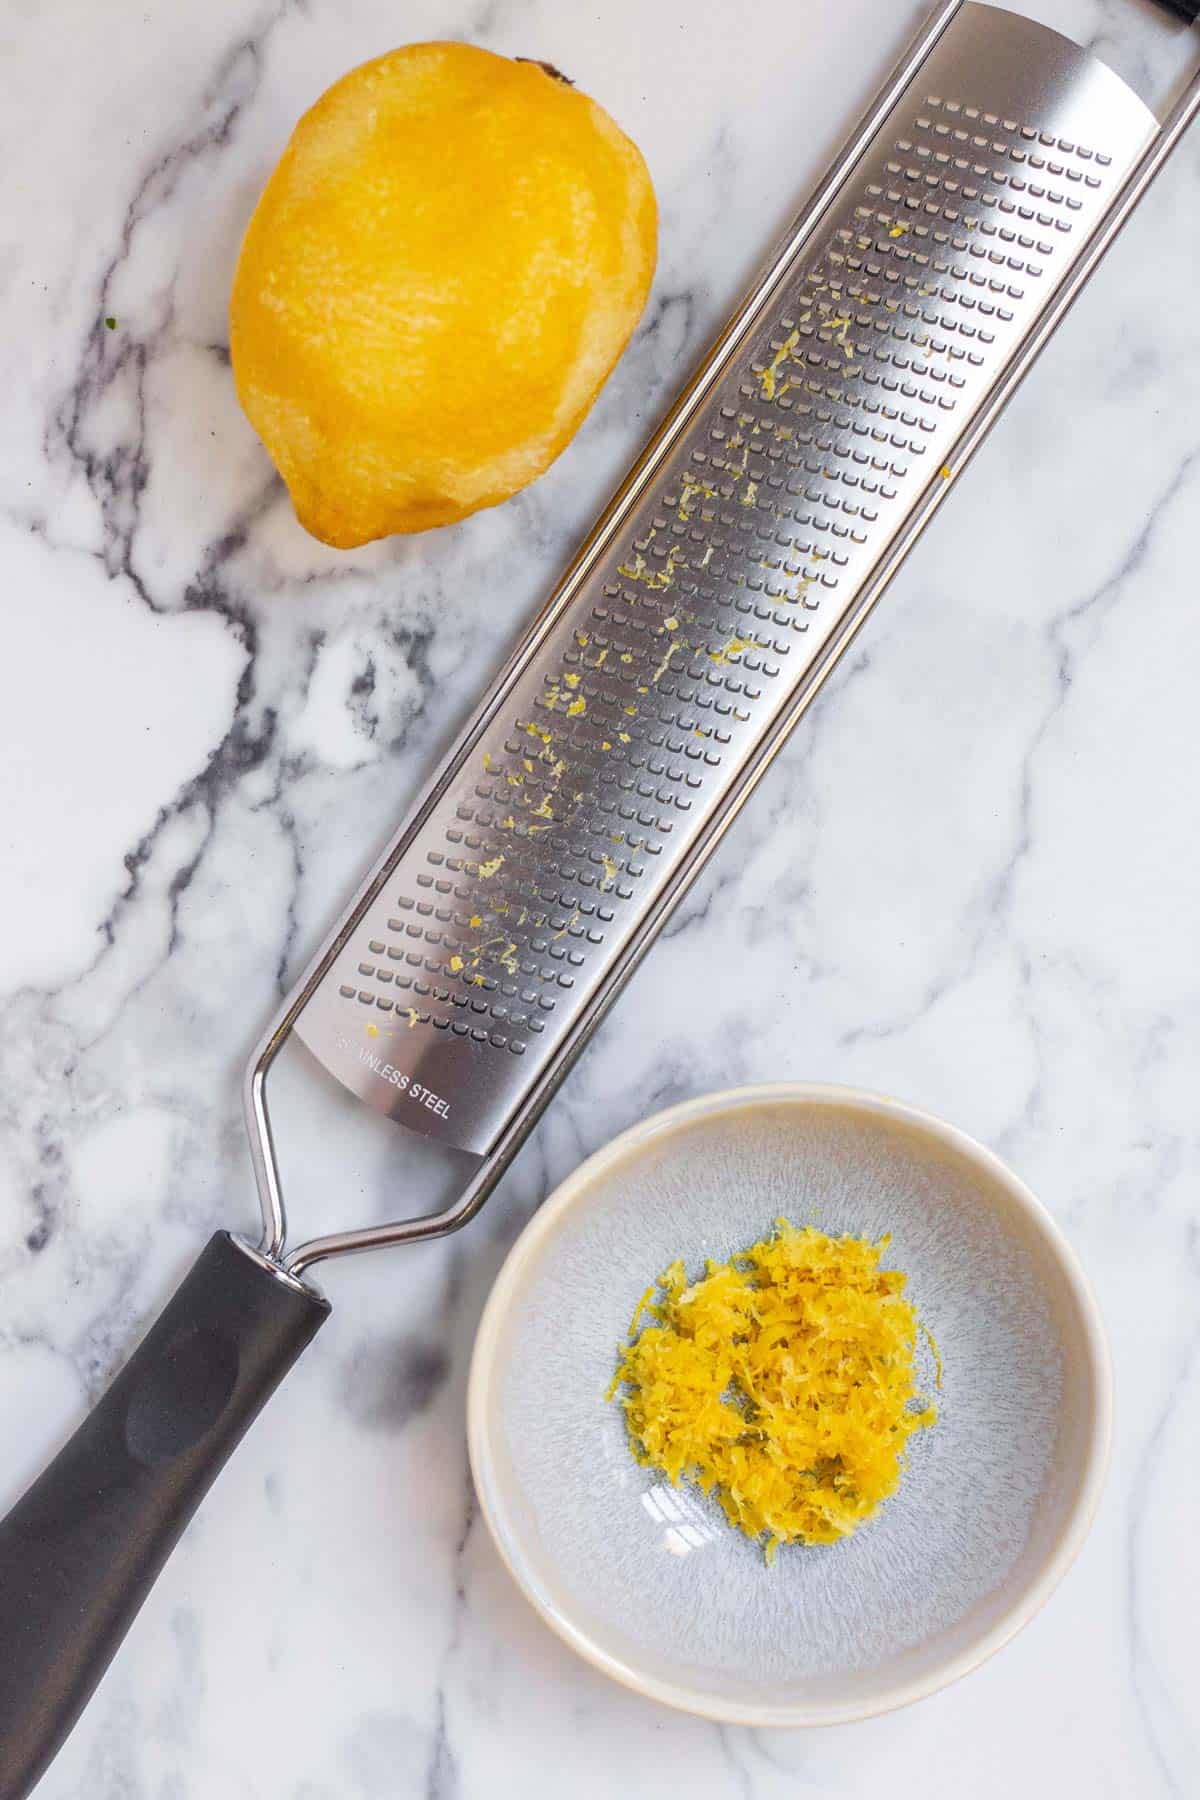 A small pinch bowl filled with fresh lemon zest next to a whole lemon and a microplane zester.